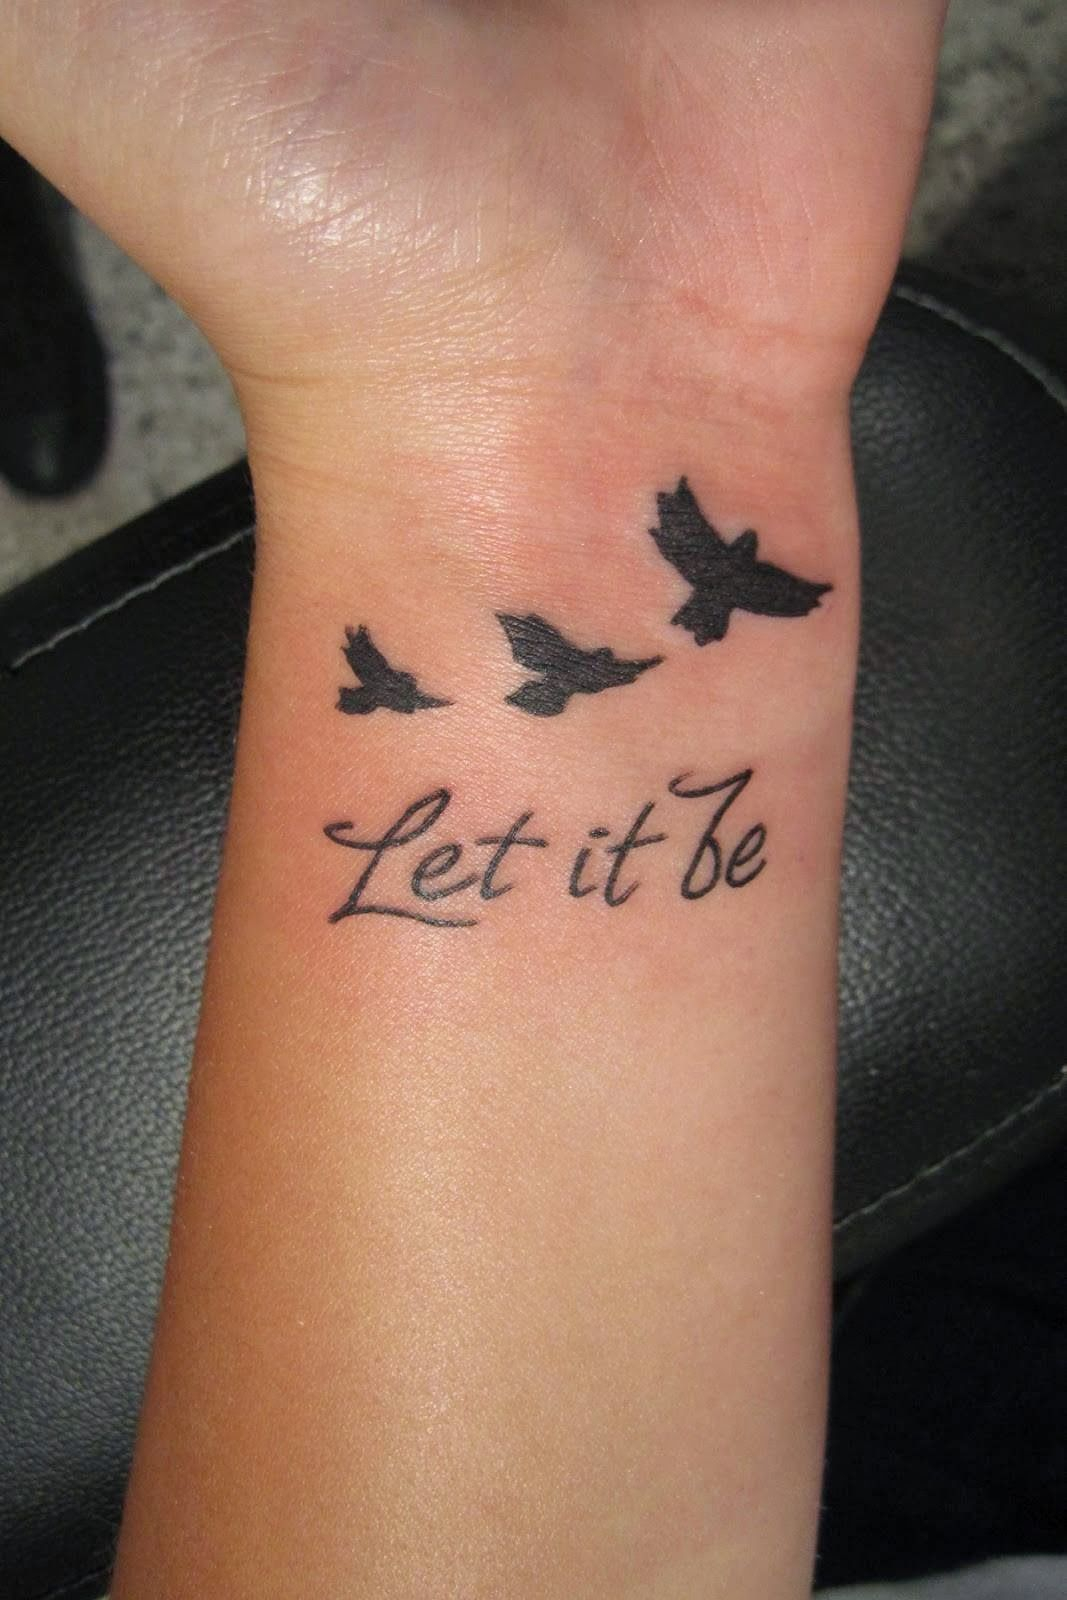 Let It Be Writing And Flying Birds Tattoo On Wrist Tattoo Mania within sizing 1067 X 1600